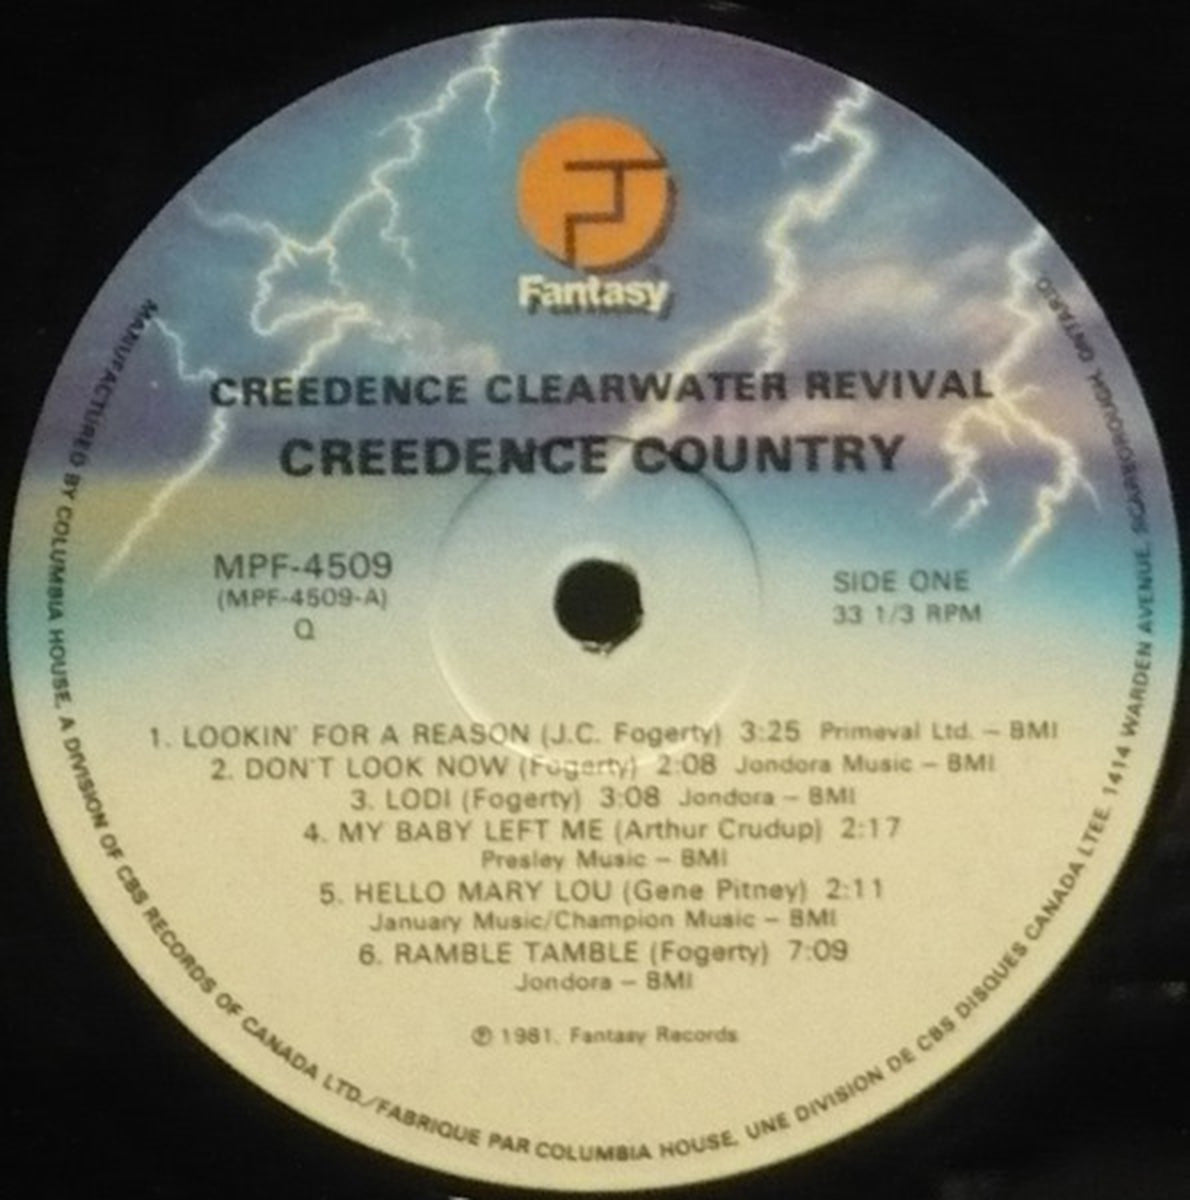 Creedence Clearwater Revival – Creedence Country - 1981